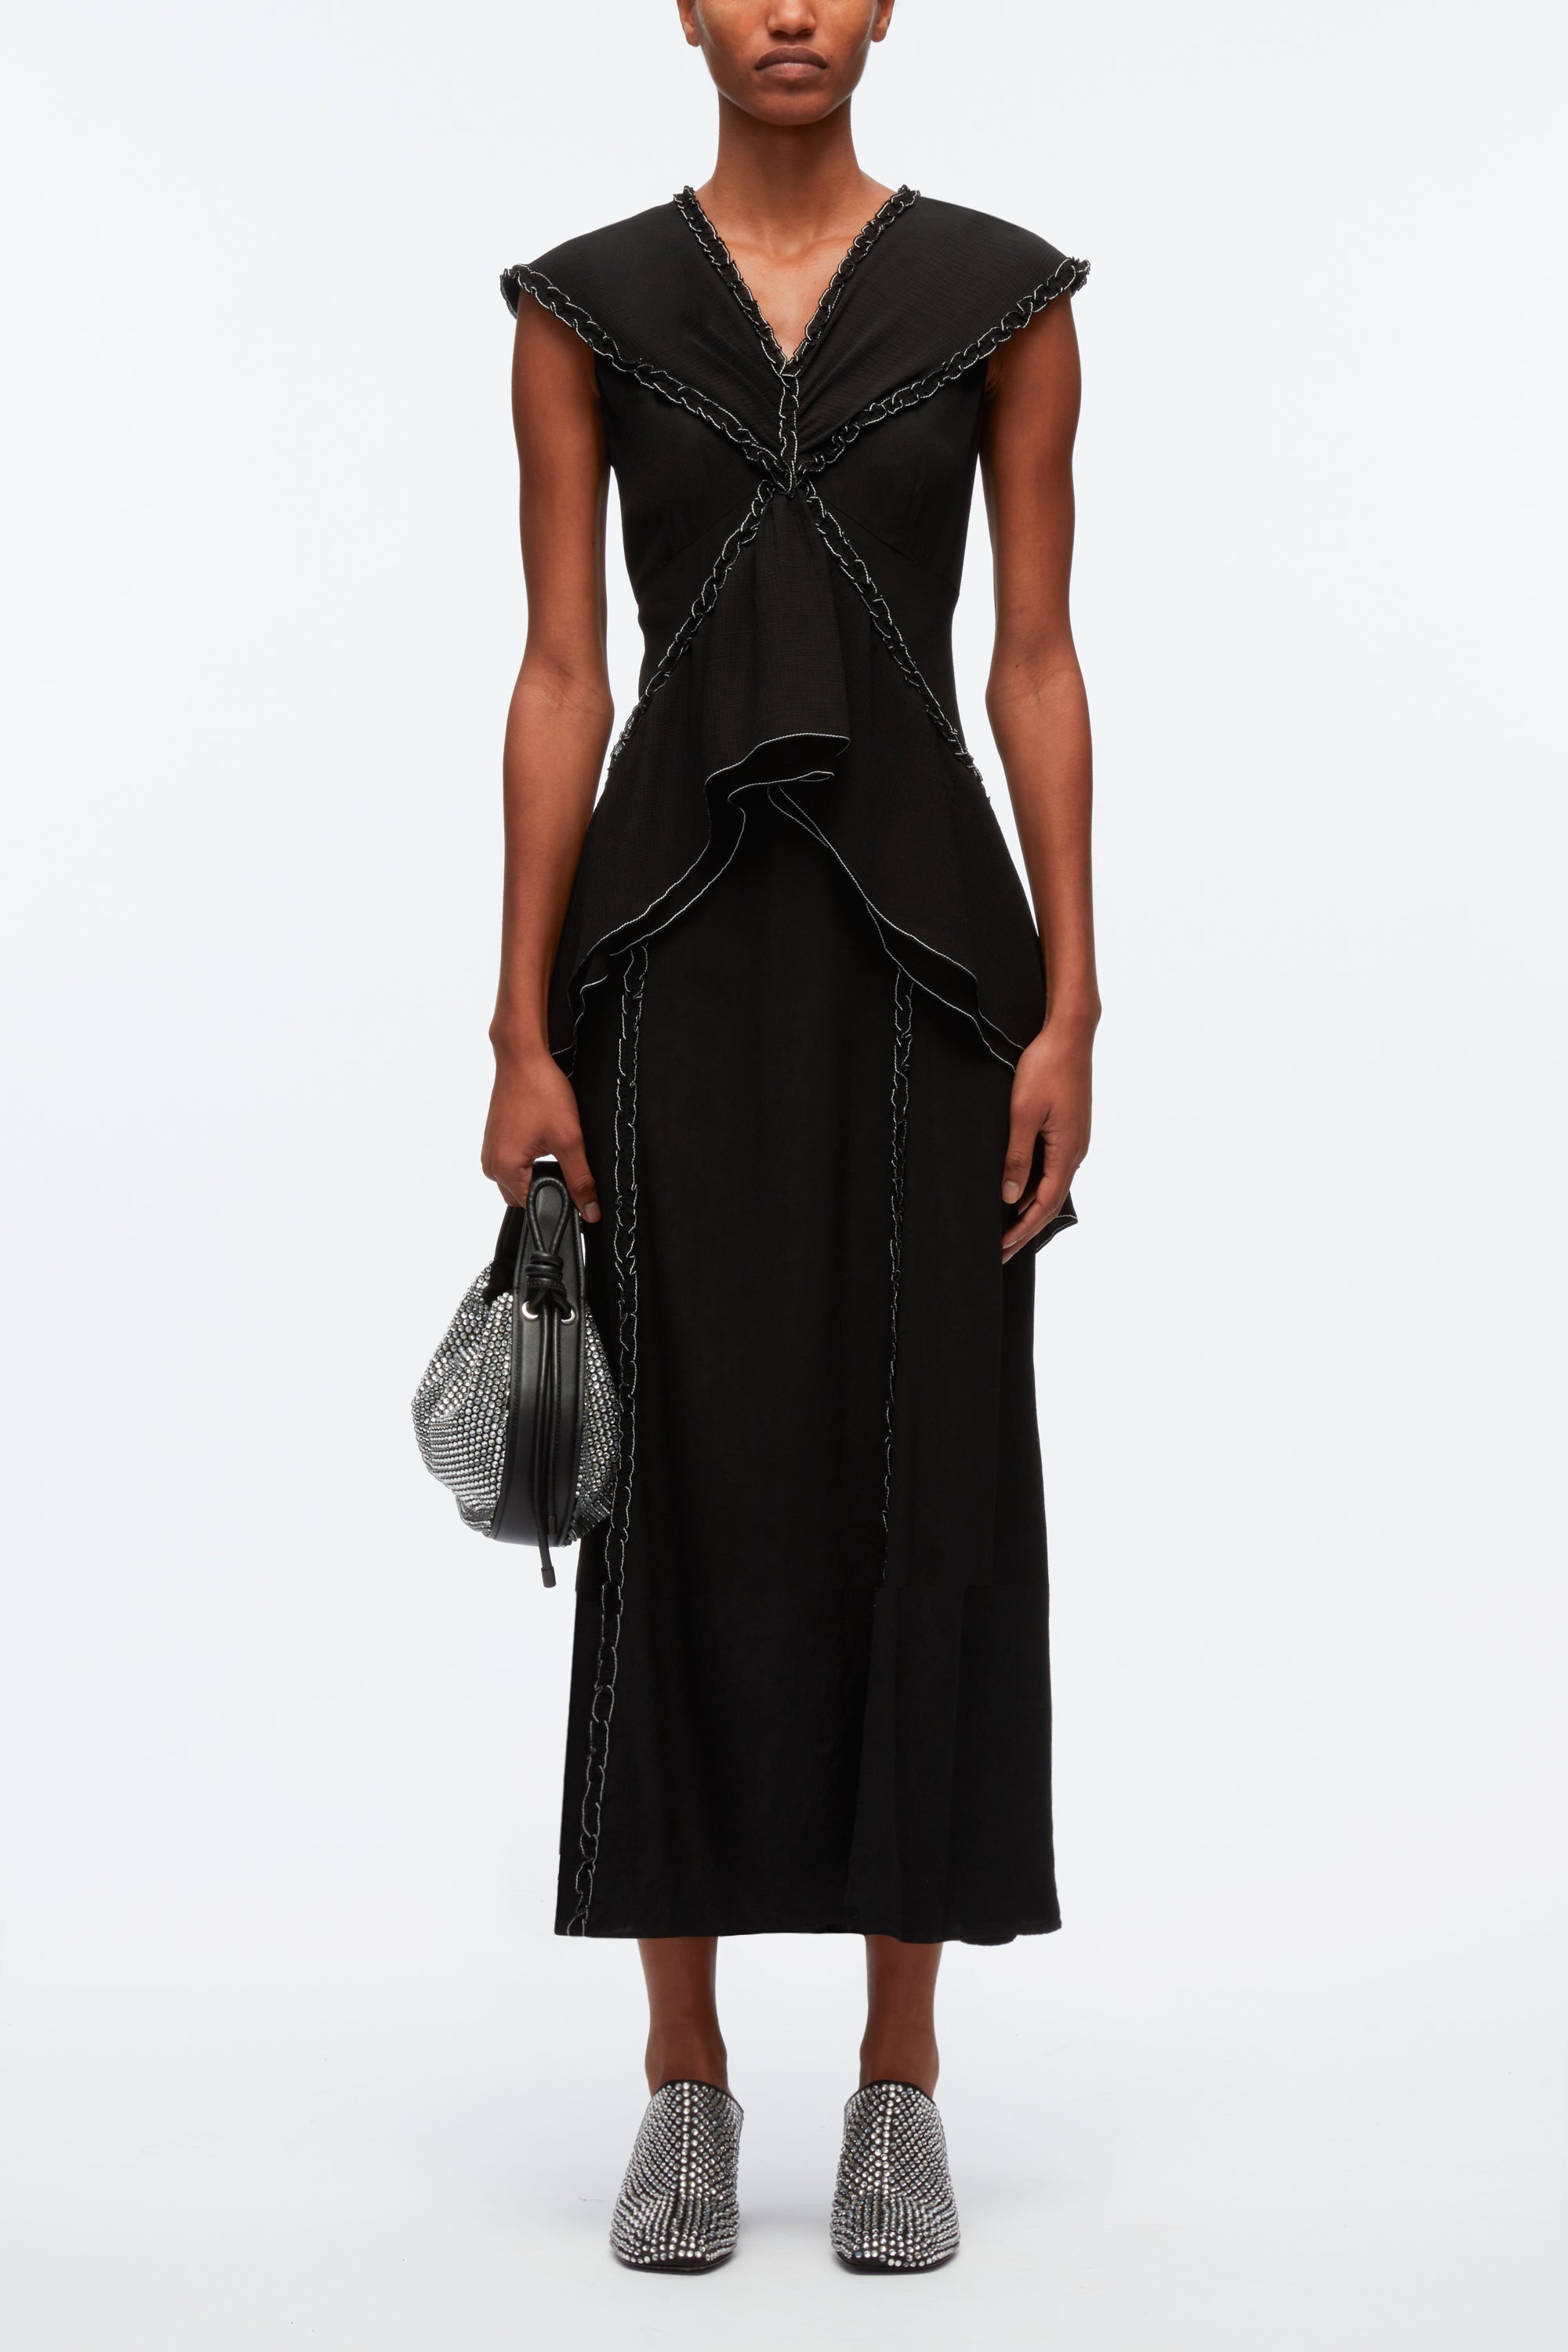 Ruffle Dress With Contrast Topstitch – 3.1 Phillip Lim